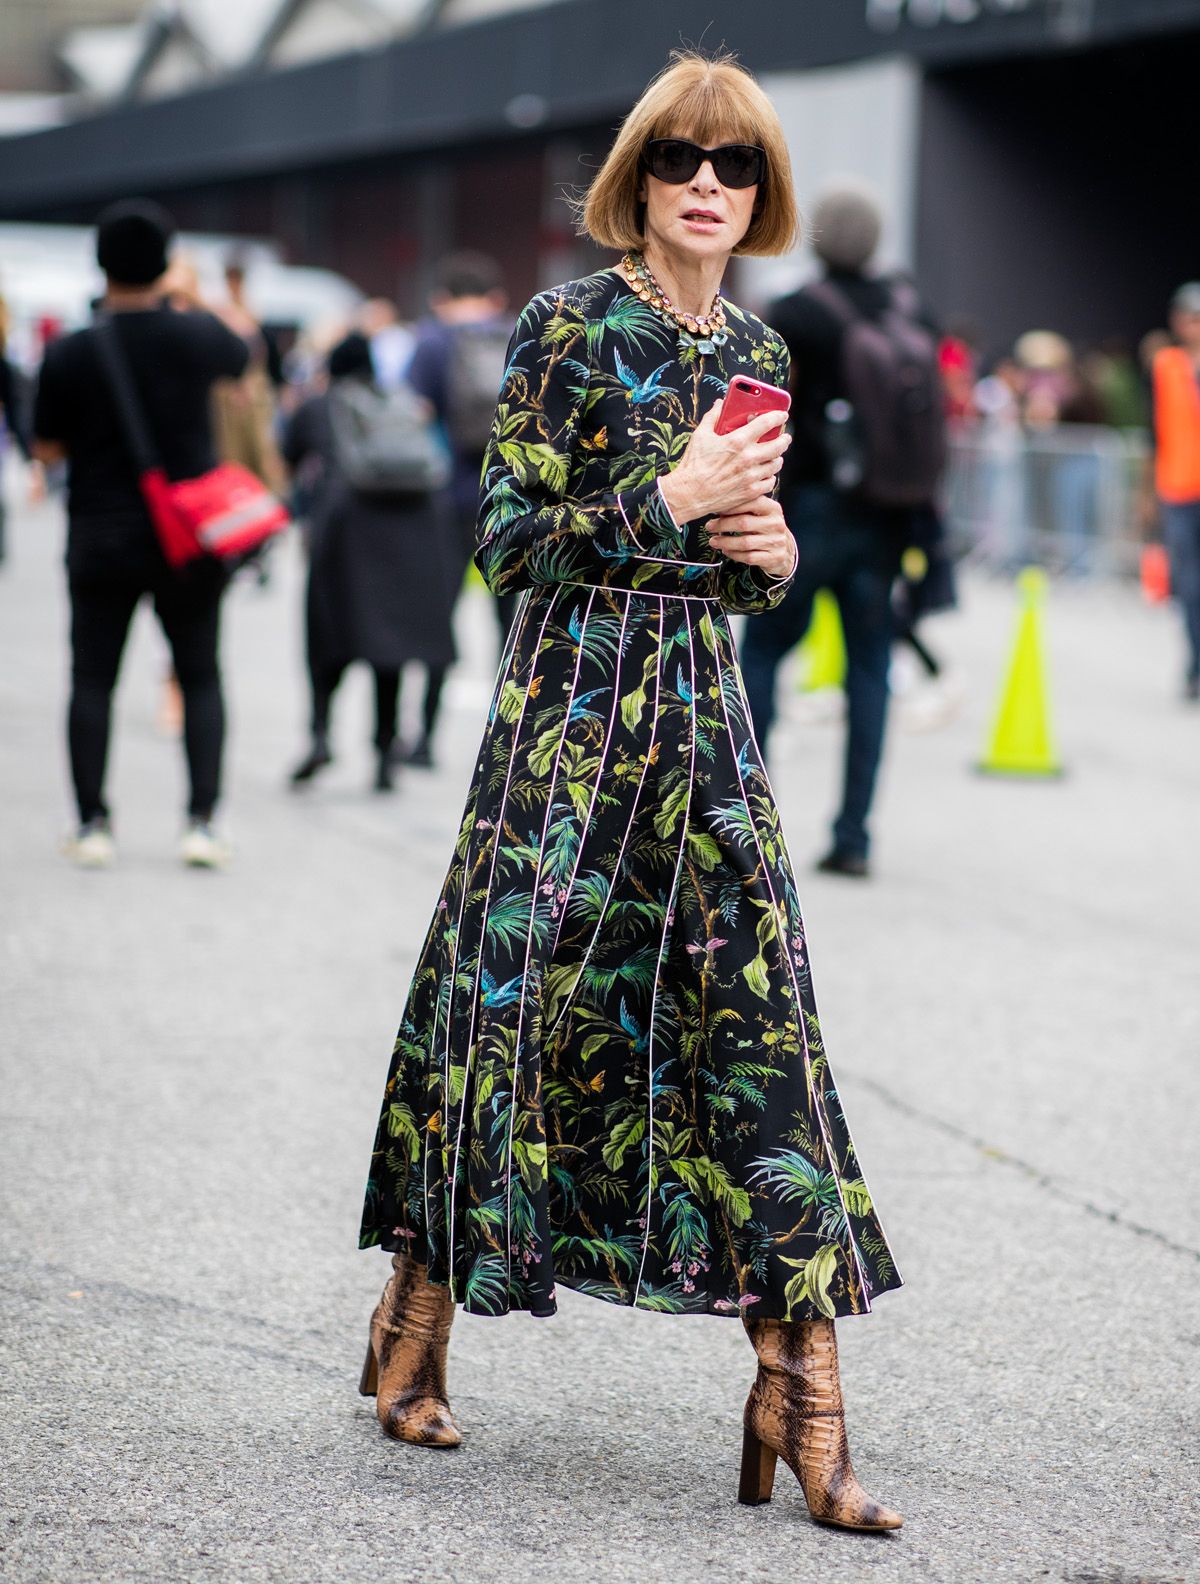 Anna Wintour's Fashion Week Outfits From the Last 25 Years | Who What Wear